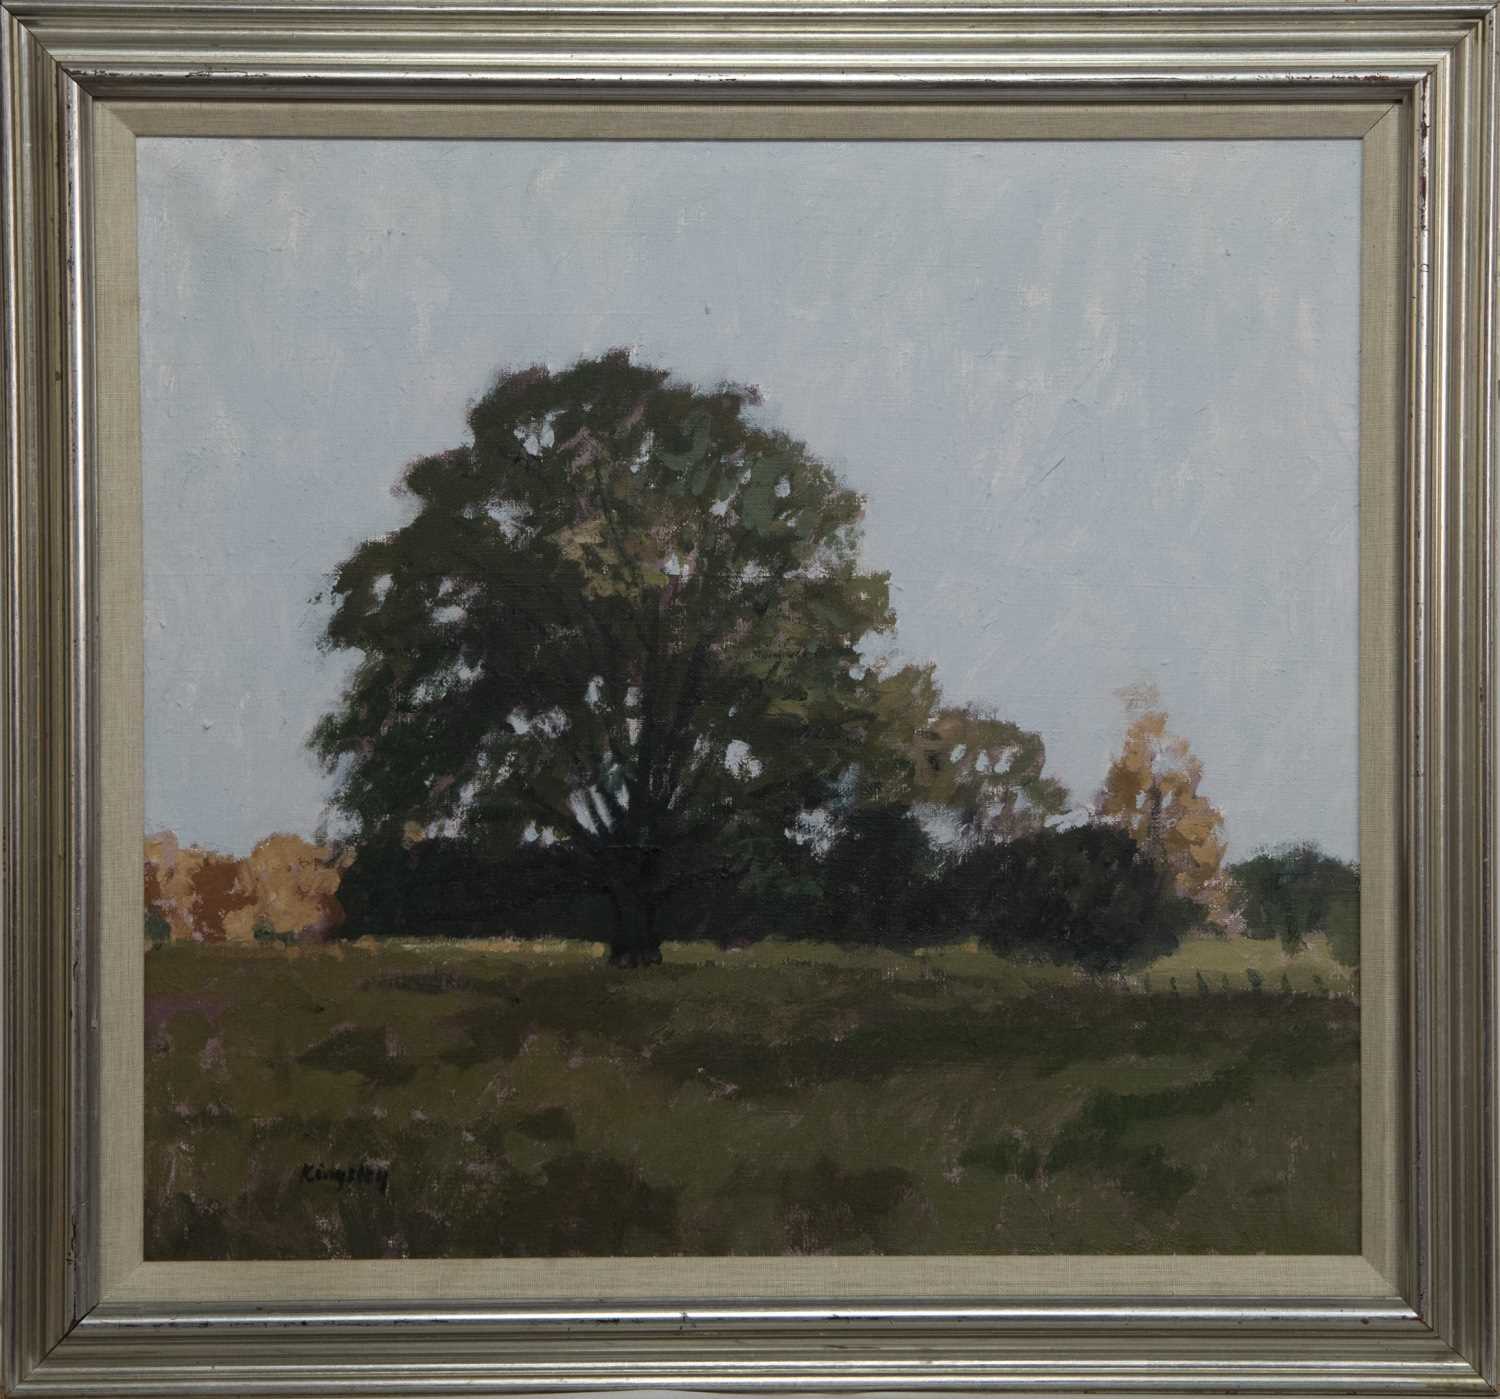 Lot 566 - DAWN LIGHT AND THE OLD TREE, AN OIL BY JOHN KINGSLEY